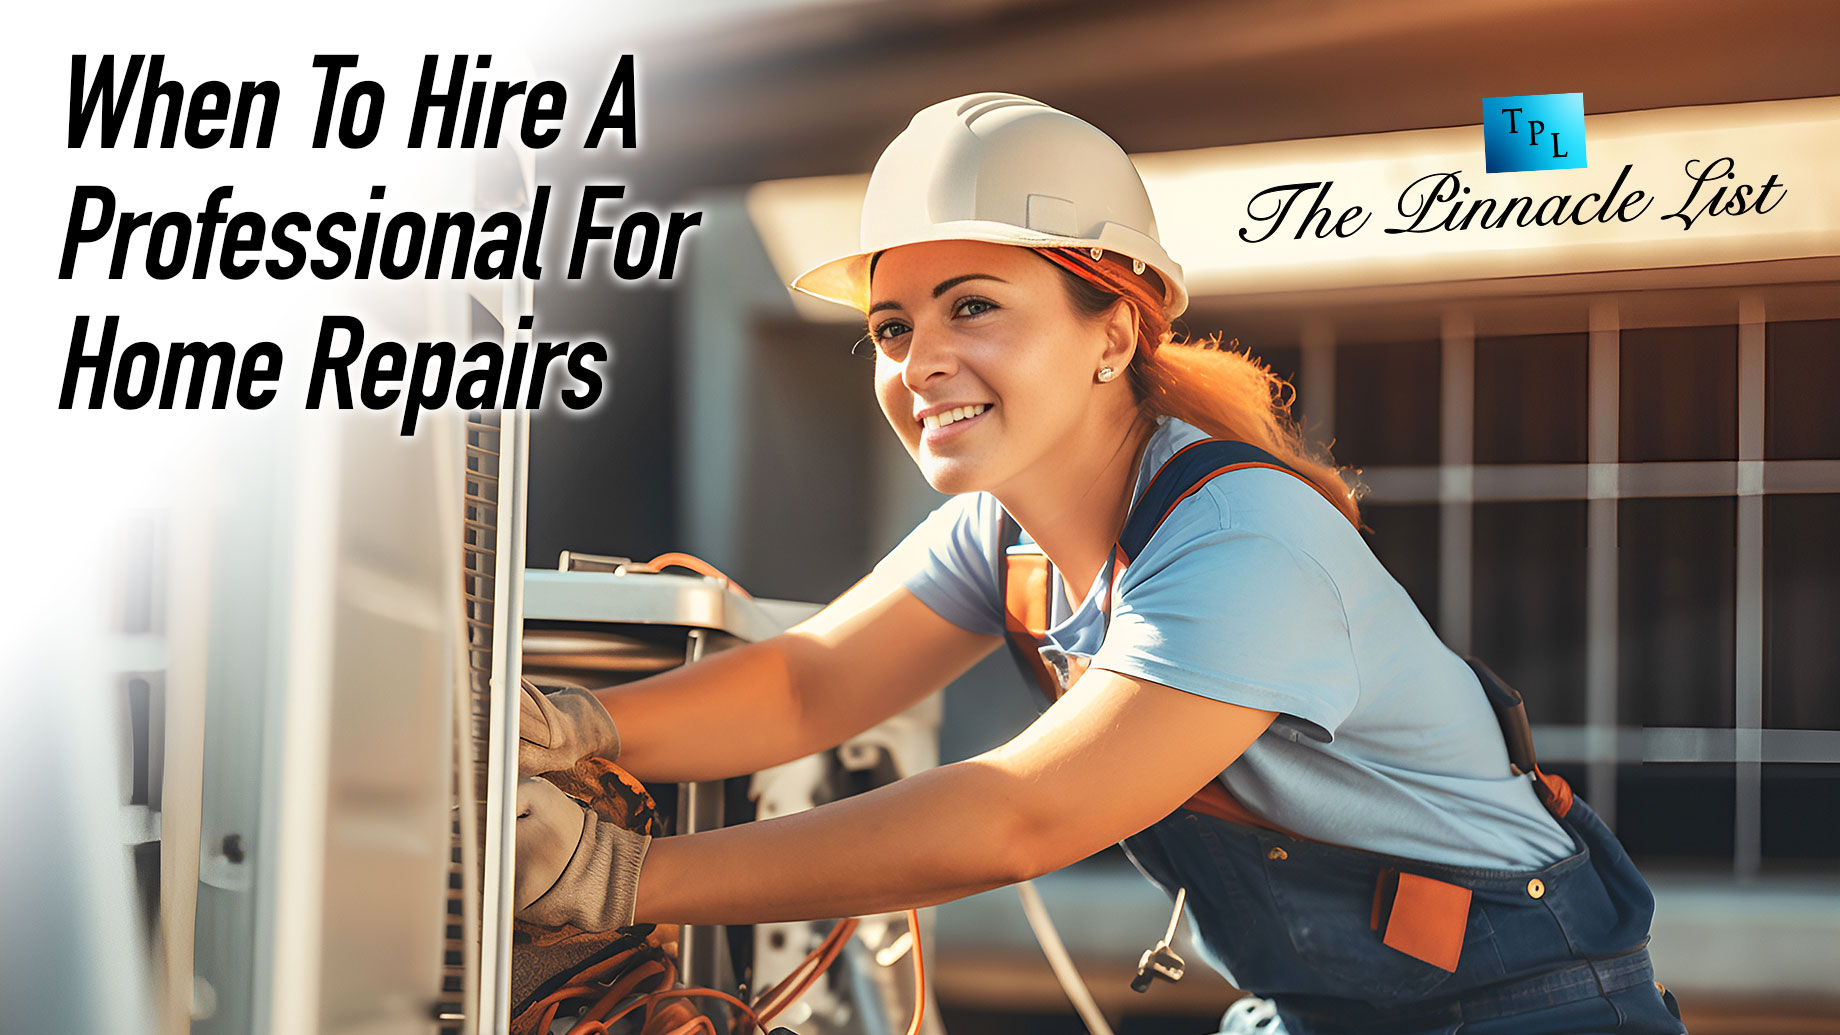 When To Hire A Professional For Home Repairs